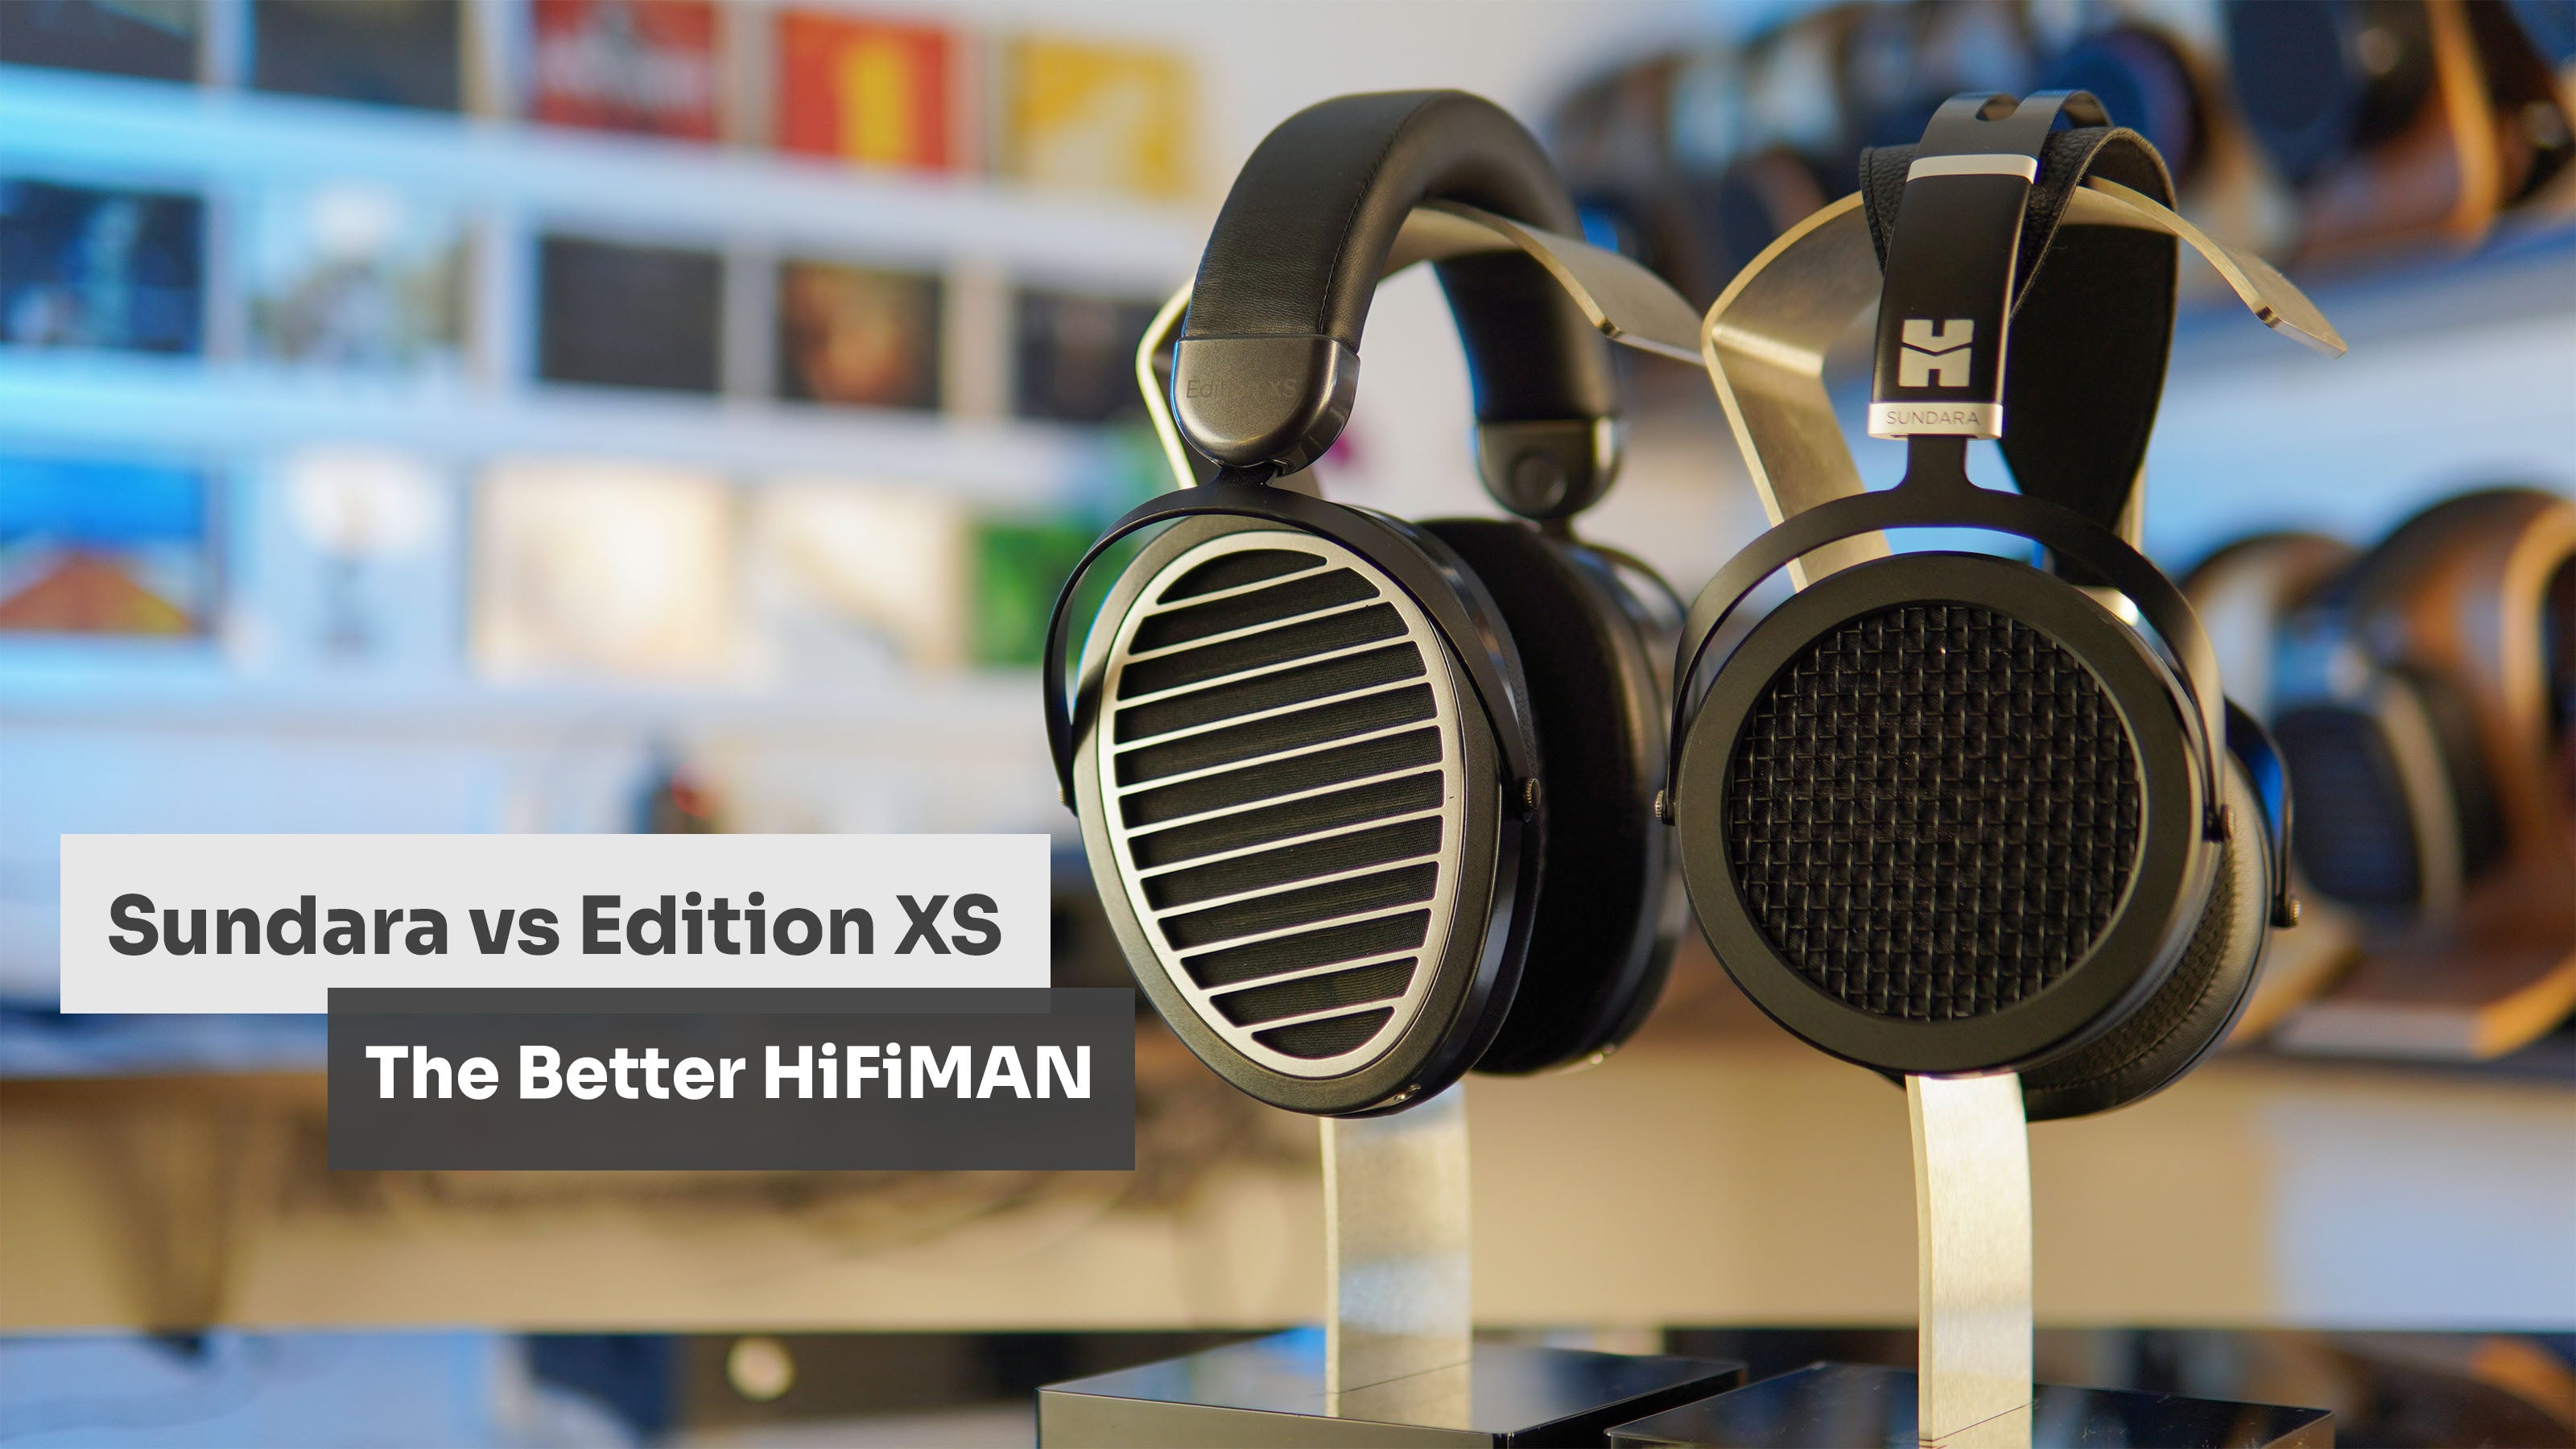 HiFiMAN Sundara is great. But the Edition XS is awesome! Should You Upgrade?